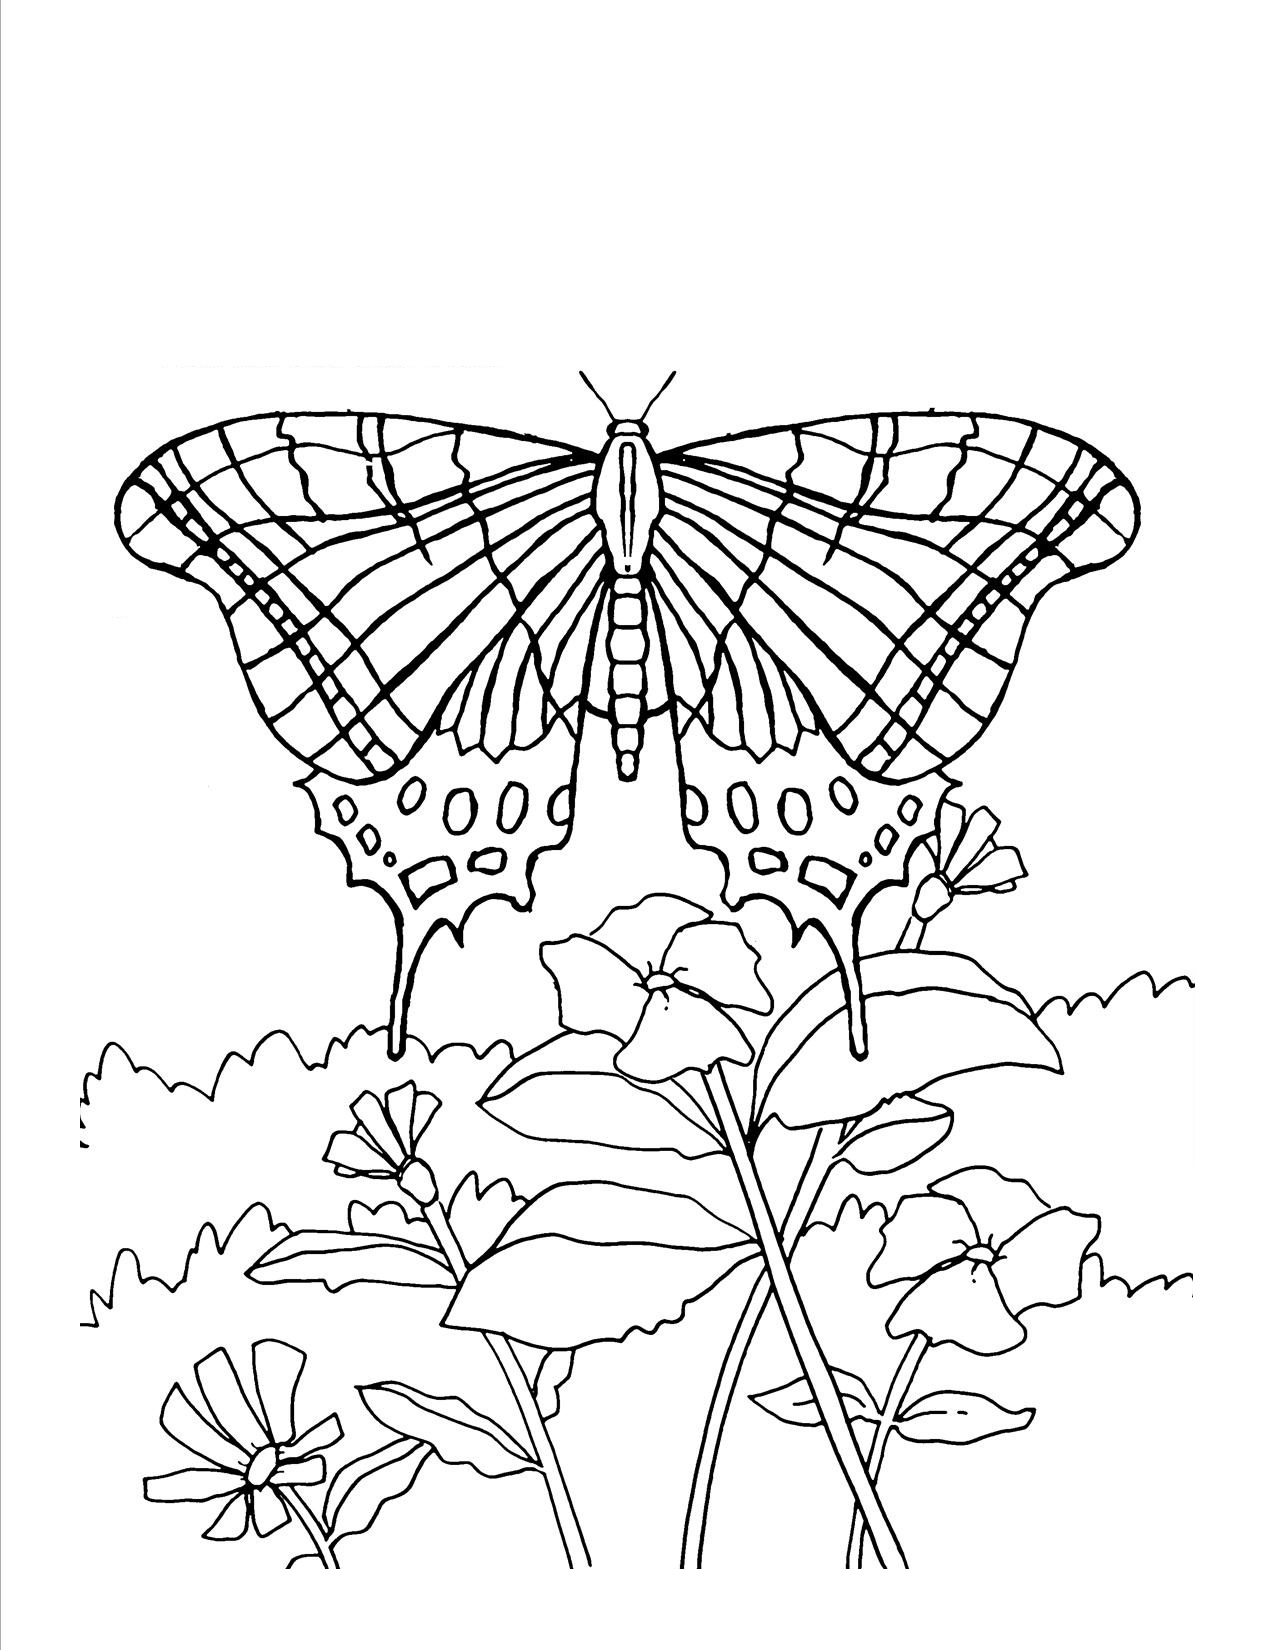 Butterfly Coloring Pages For Adults - Visual Arts Ideas